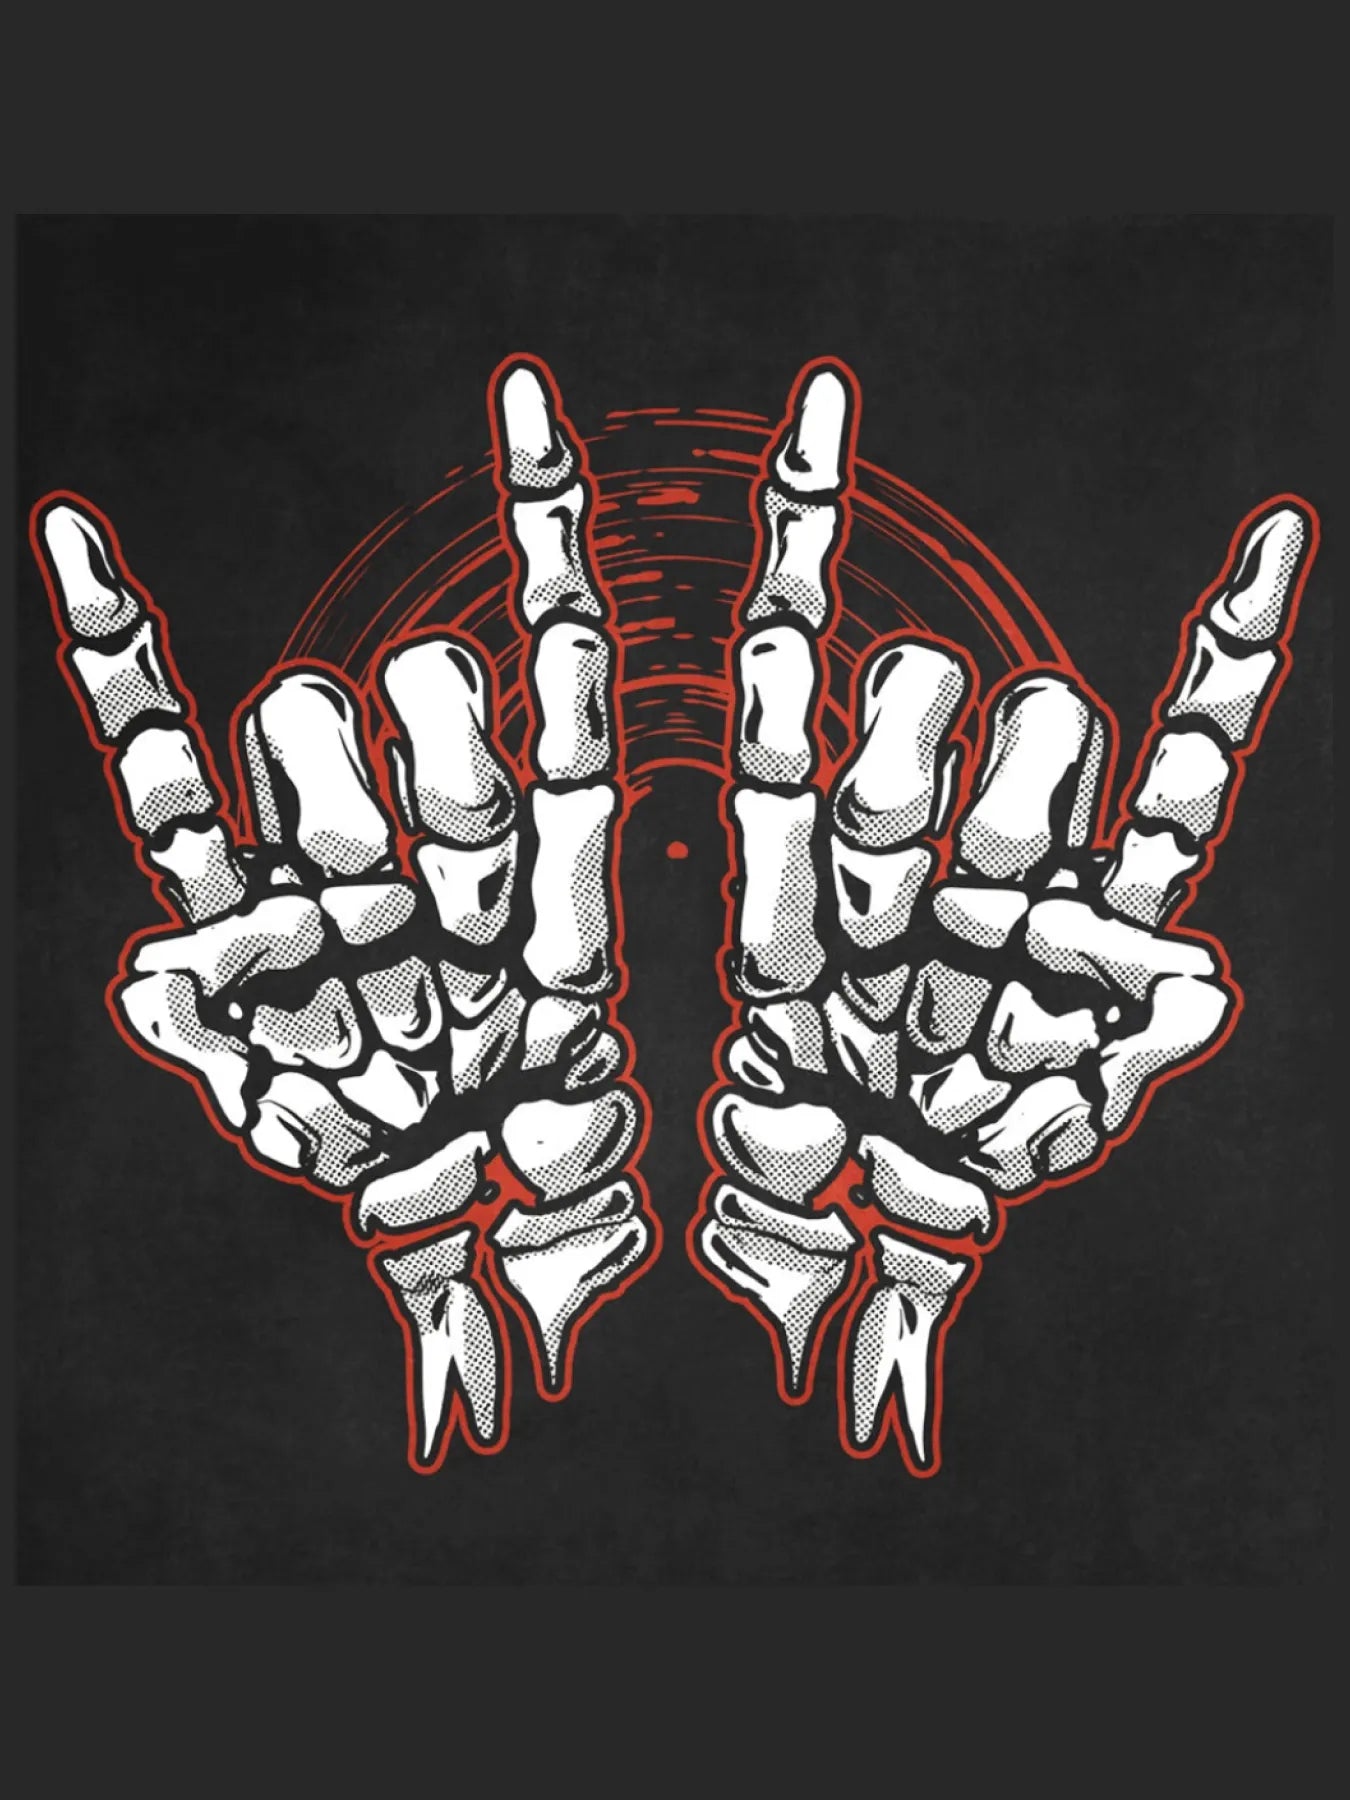 Skeleton hands rock and roll